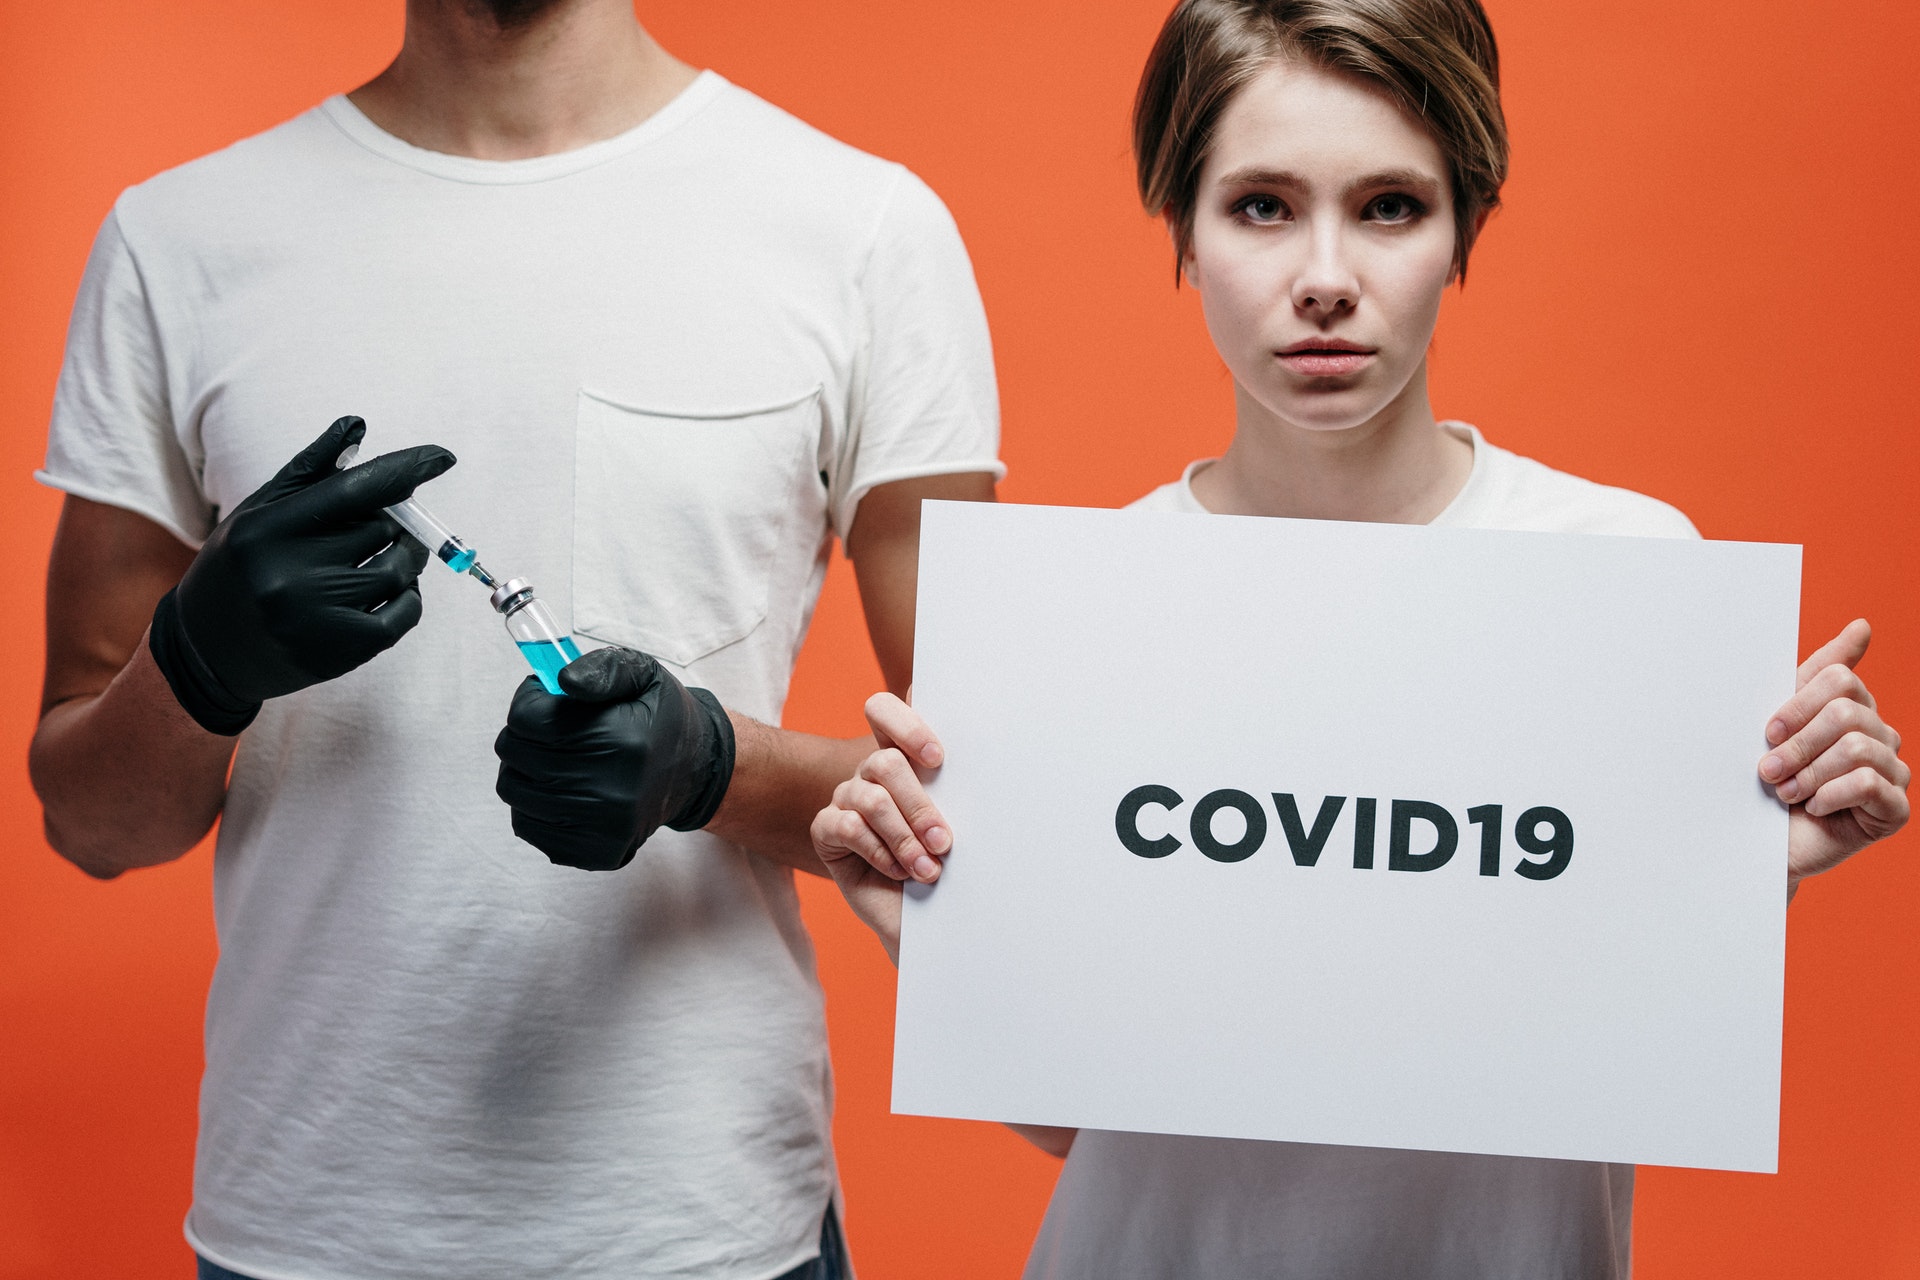 COVID-19 Update for May 2021